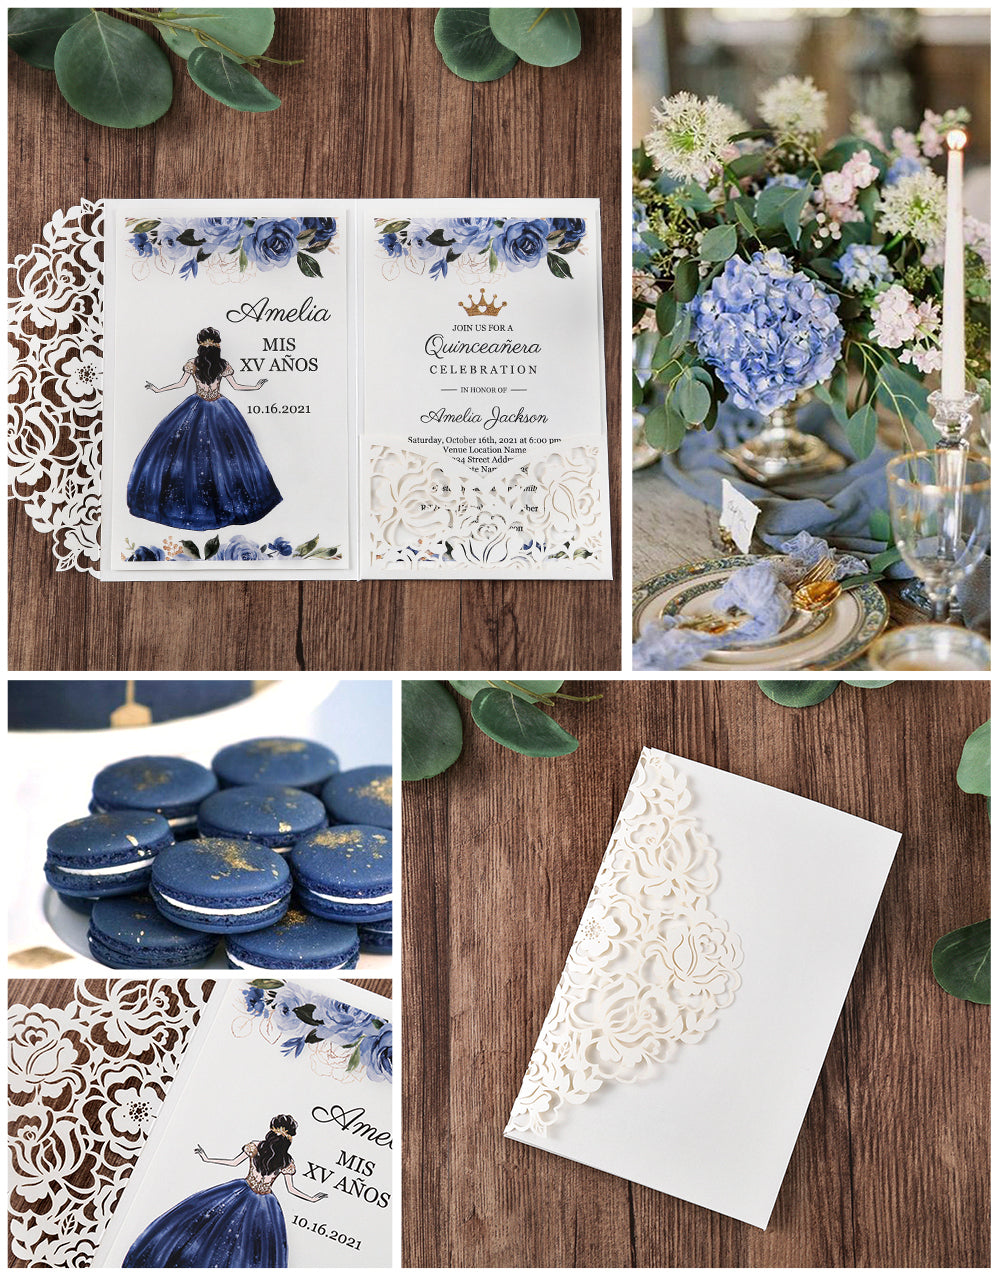 White Floral Laser cut invitation cards for Quinceanera